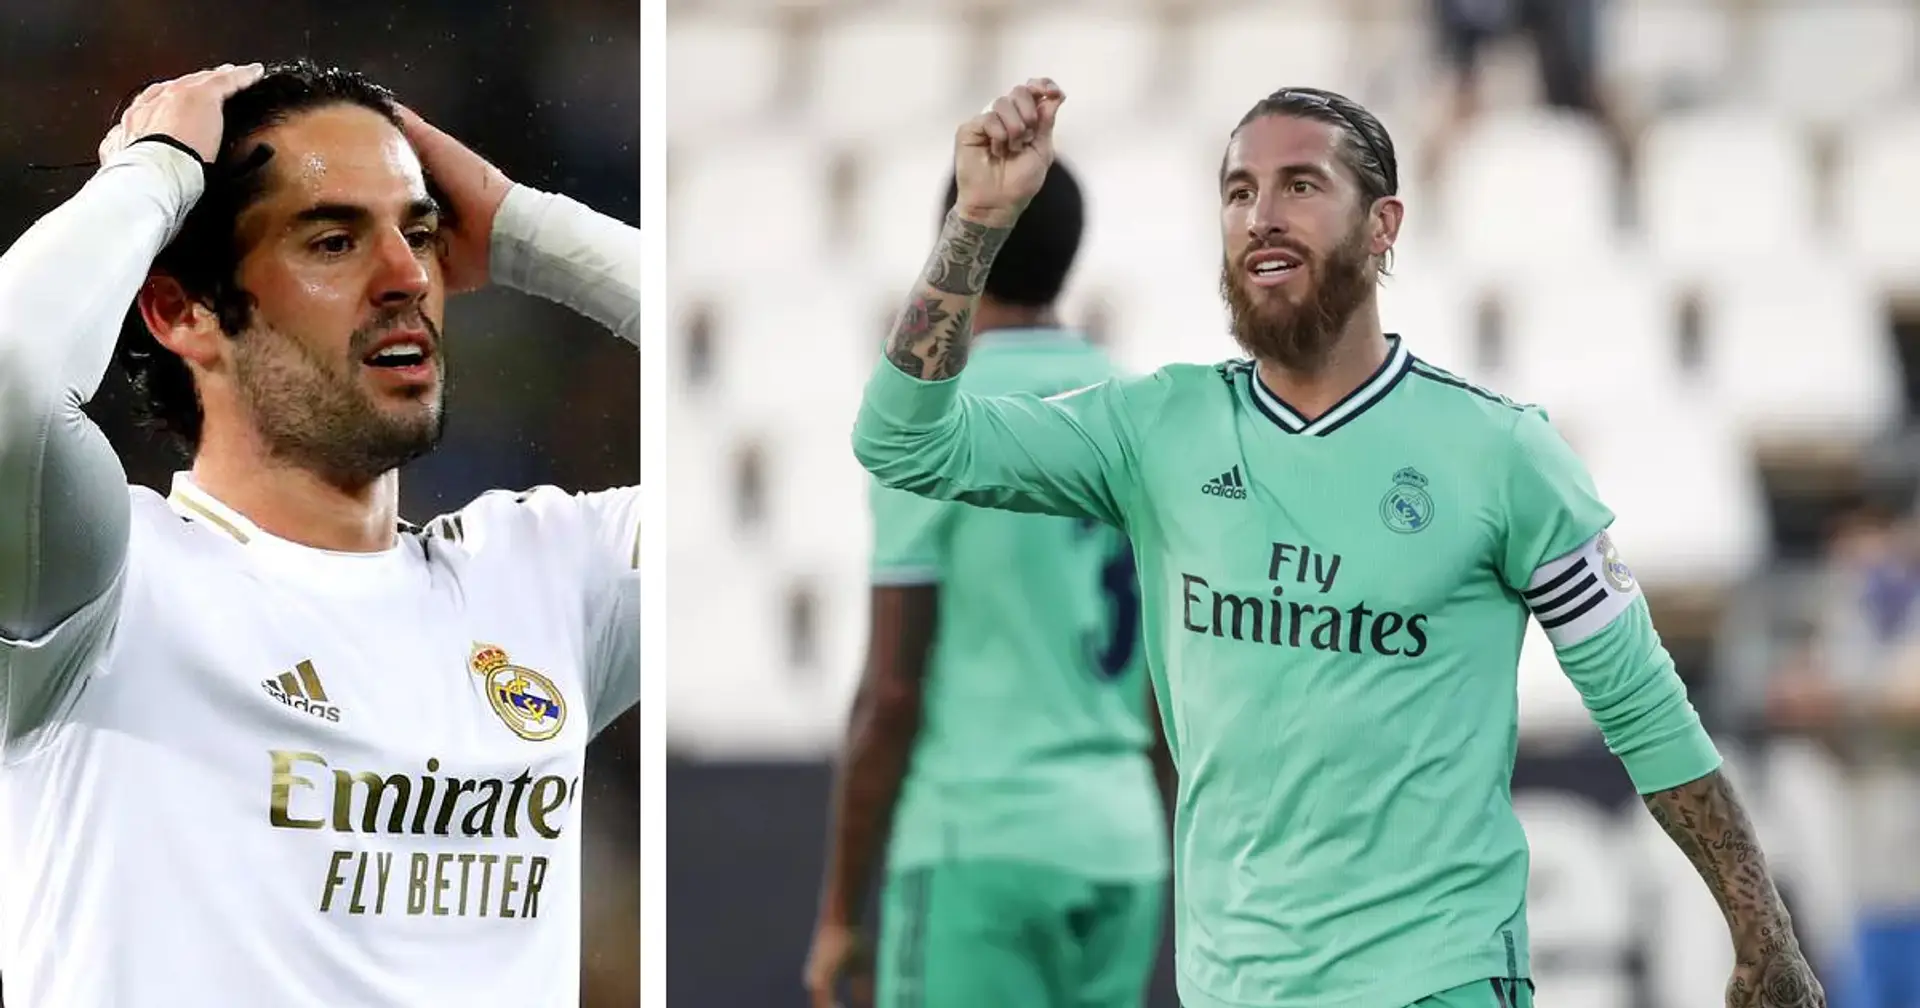 Diario Sport: Sergio Ramos clashes with Isco and Marcelo in dressing room after Zidane rant 